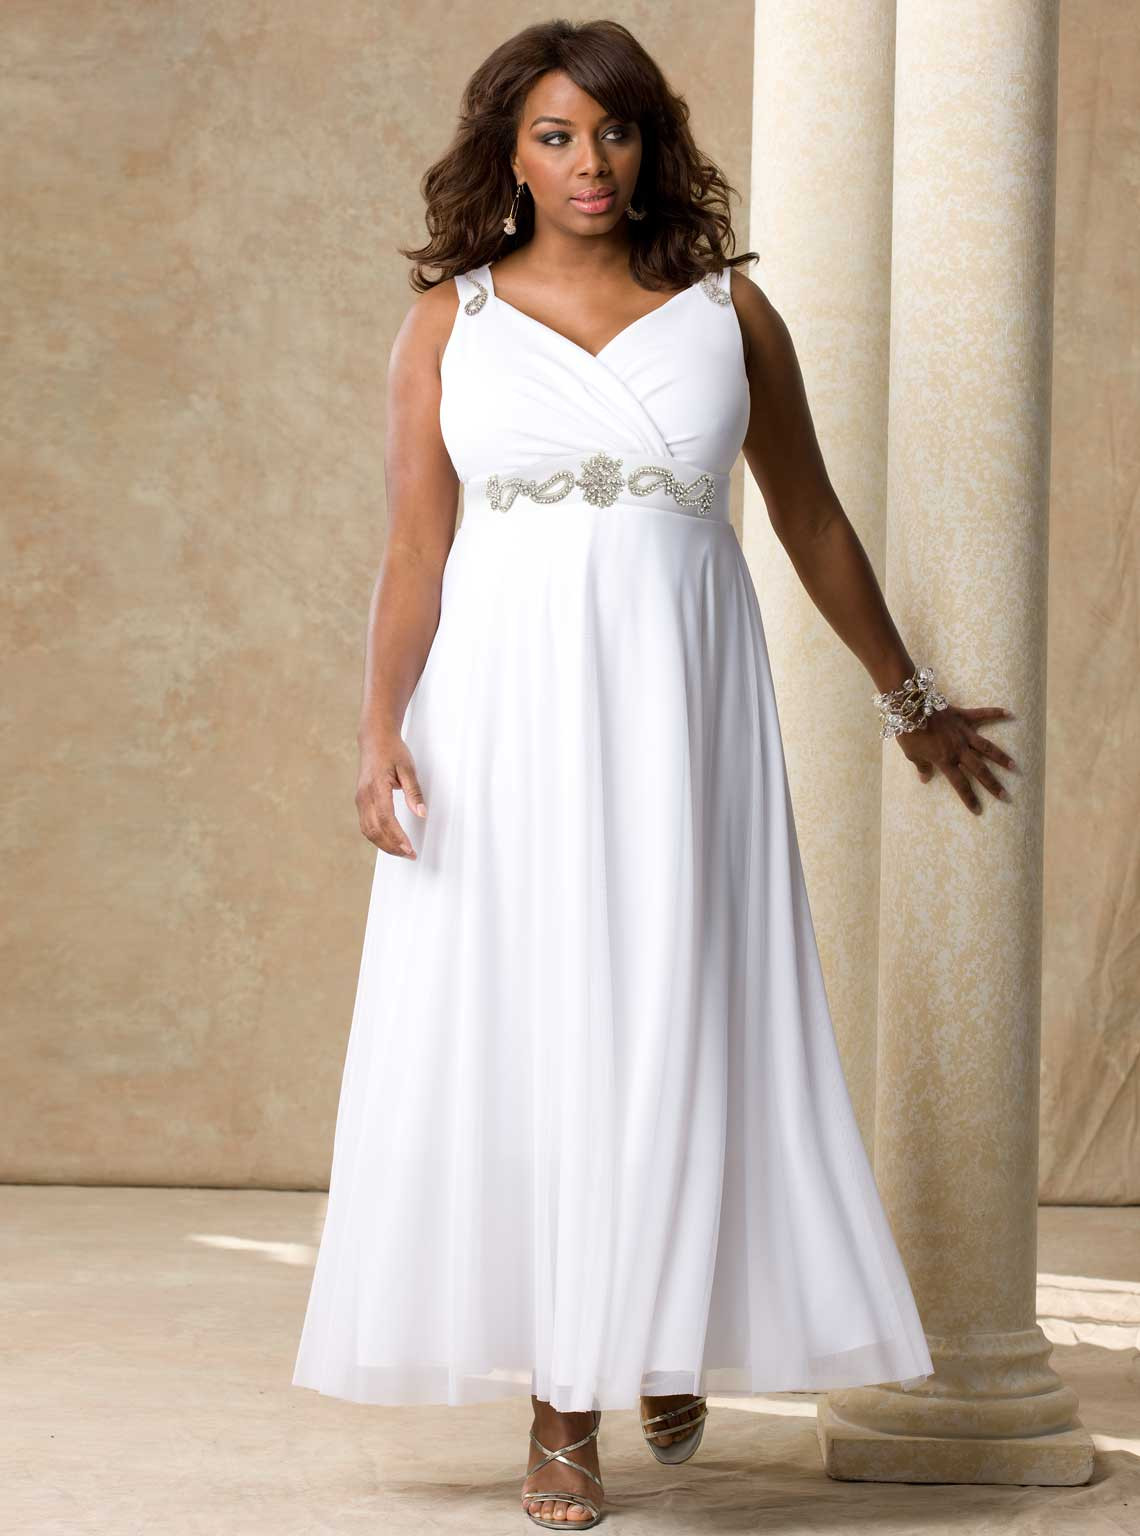 Plus Size Dresses For Wedding
 BEST WEDDING IDEAS Searching For An Affordable Plus Size